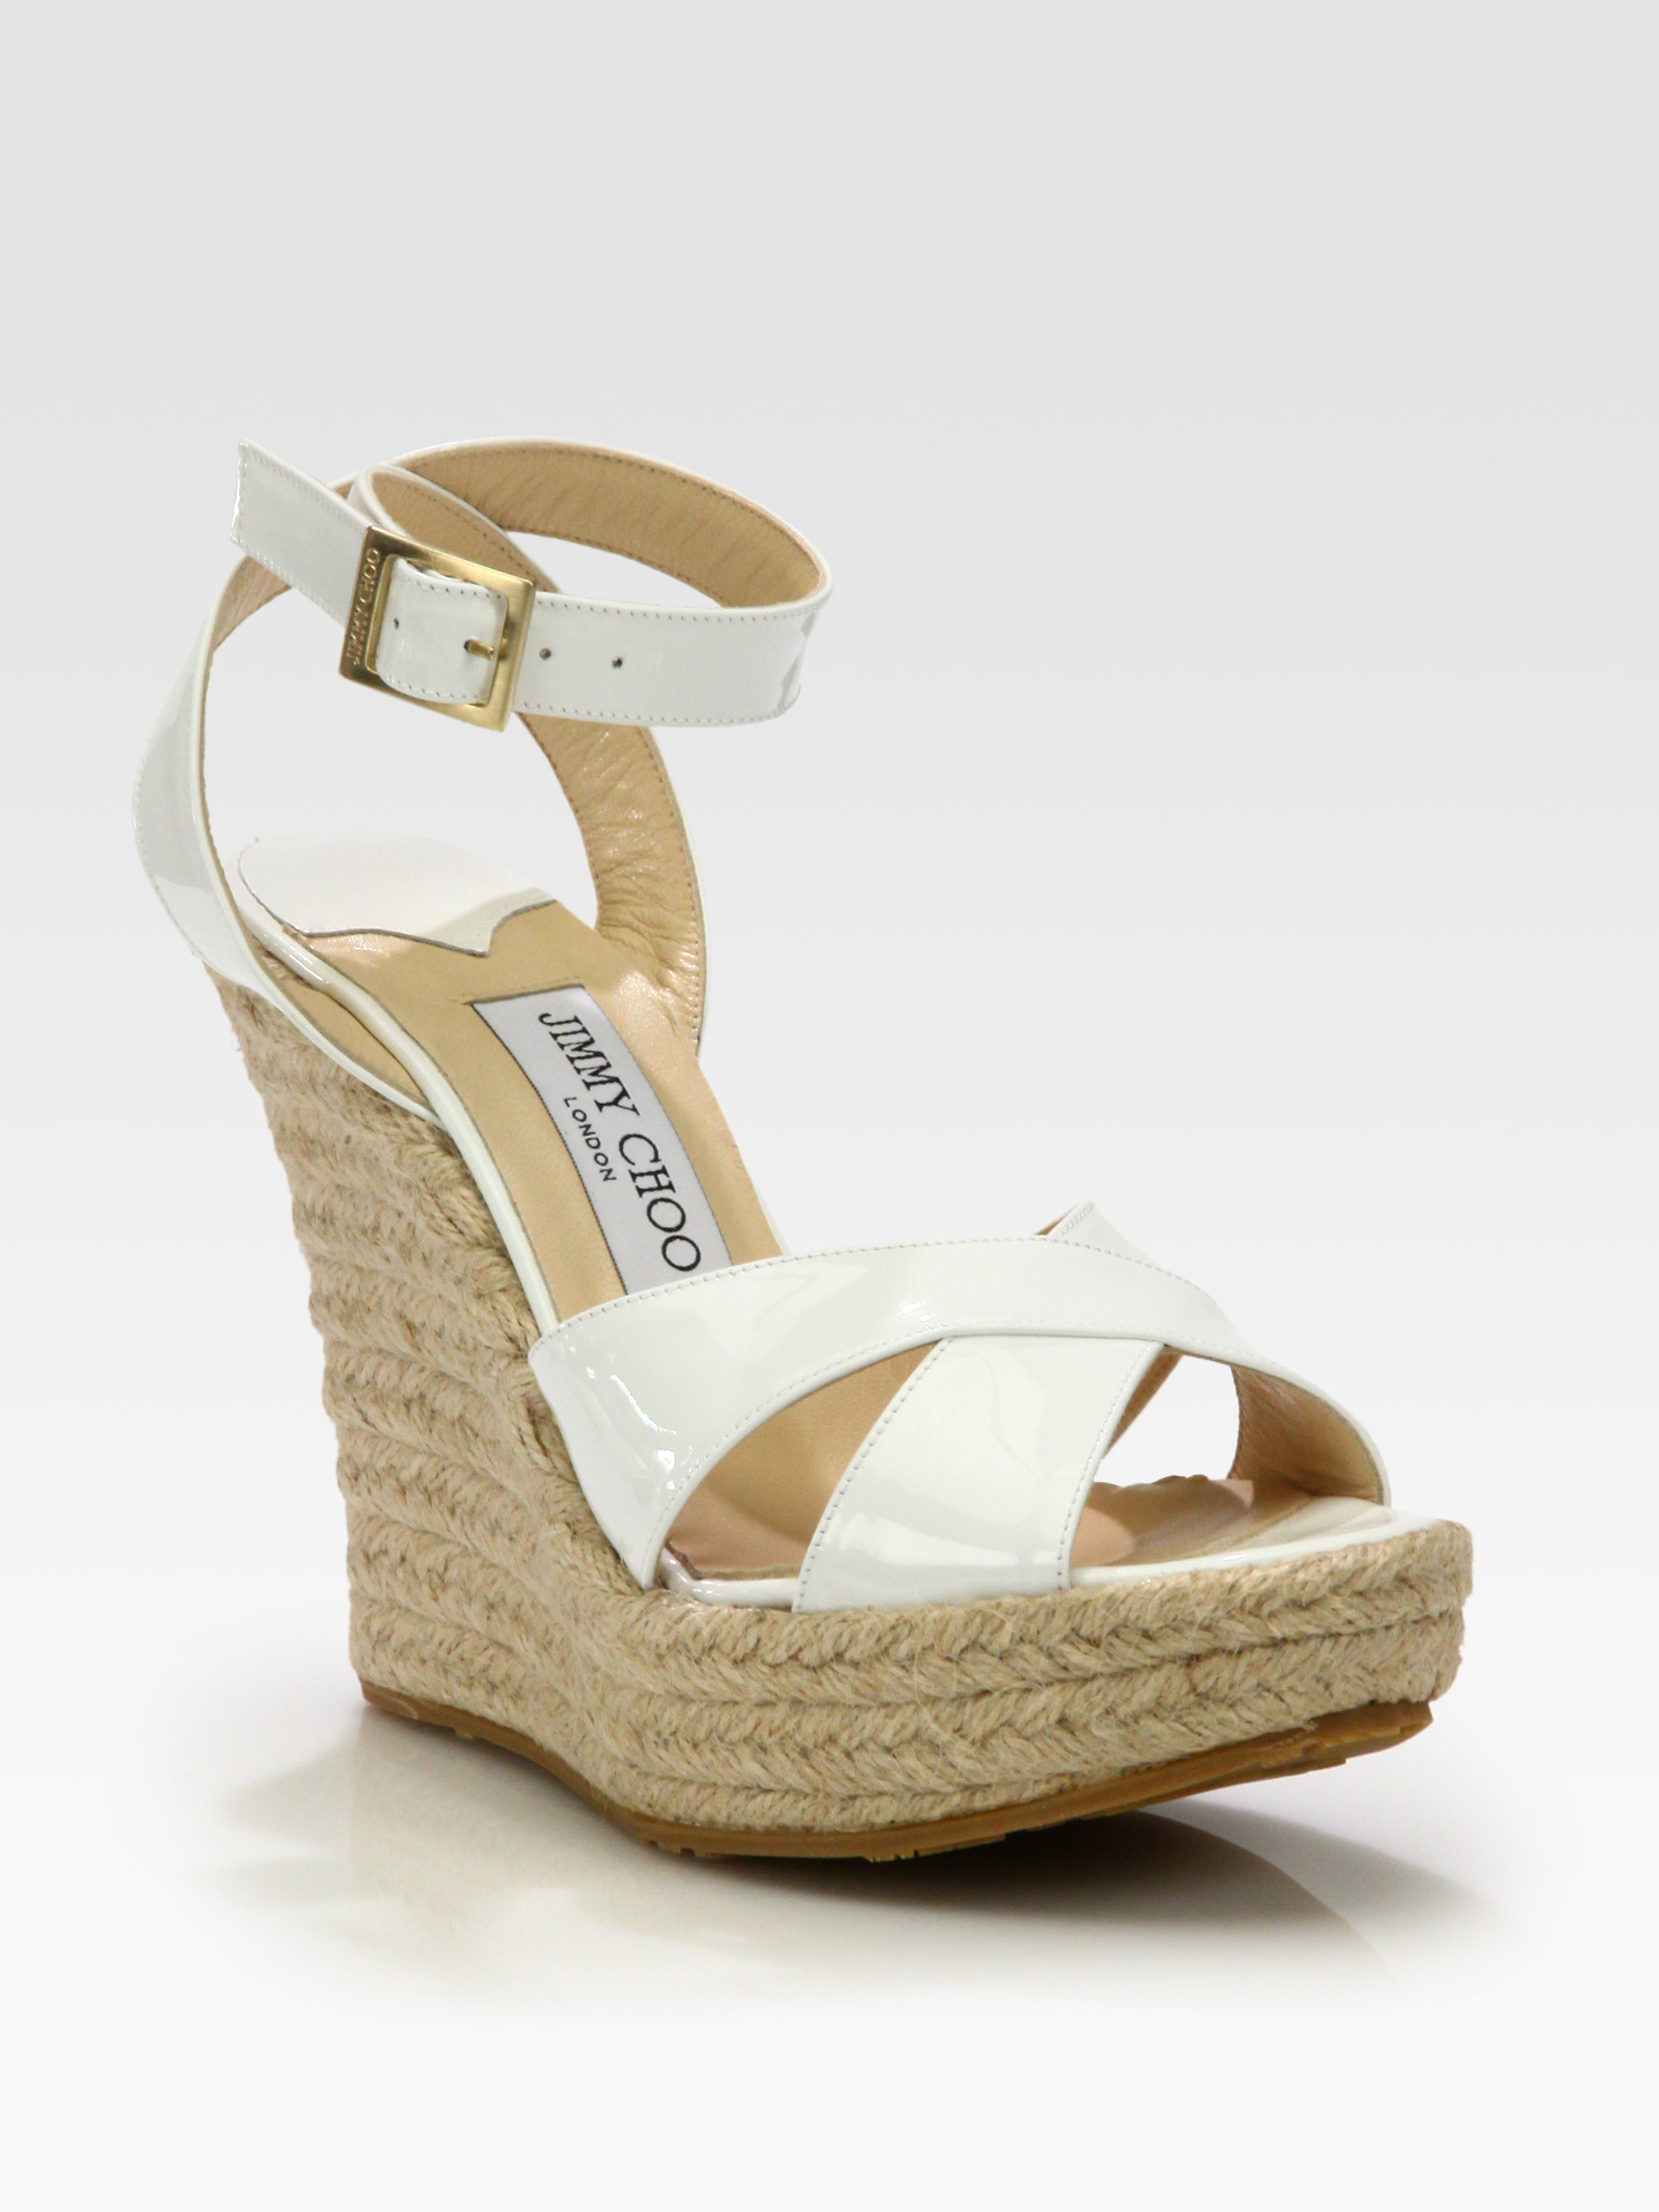 Jimmy Choo Pheonix Patent Leather Espadrille Wedge Sandals in (white) | Lyst